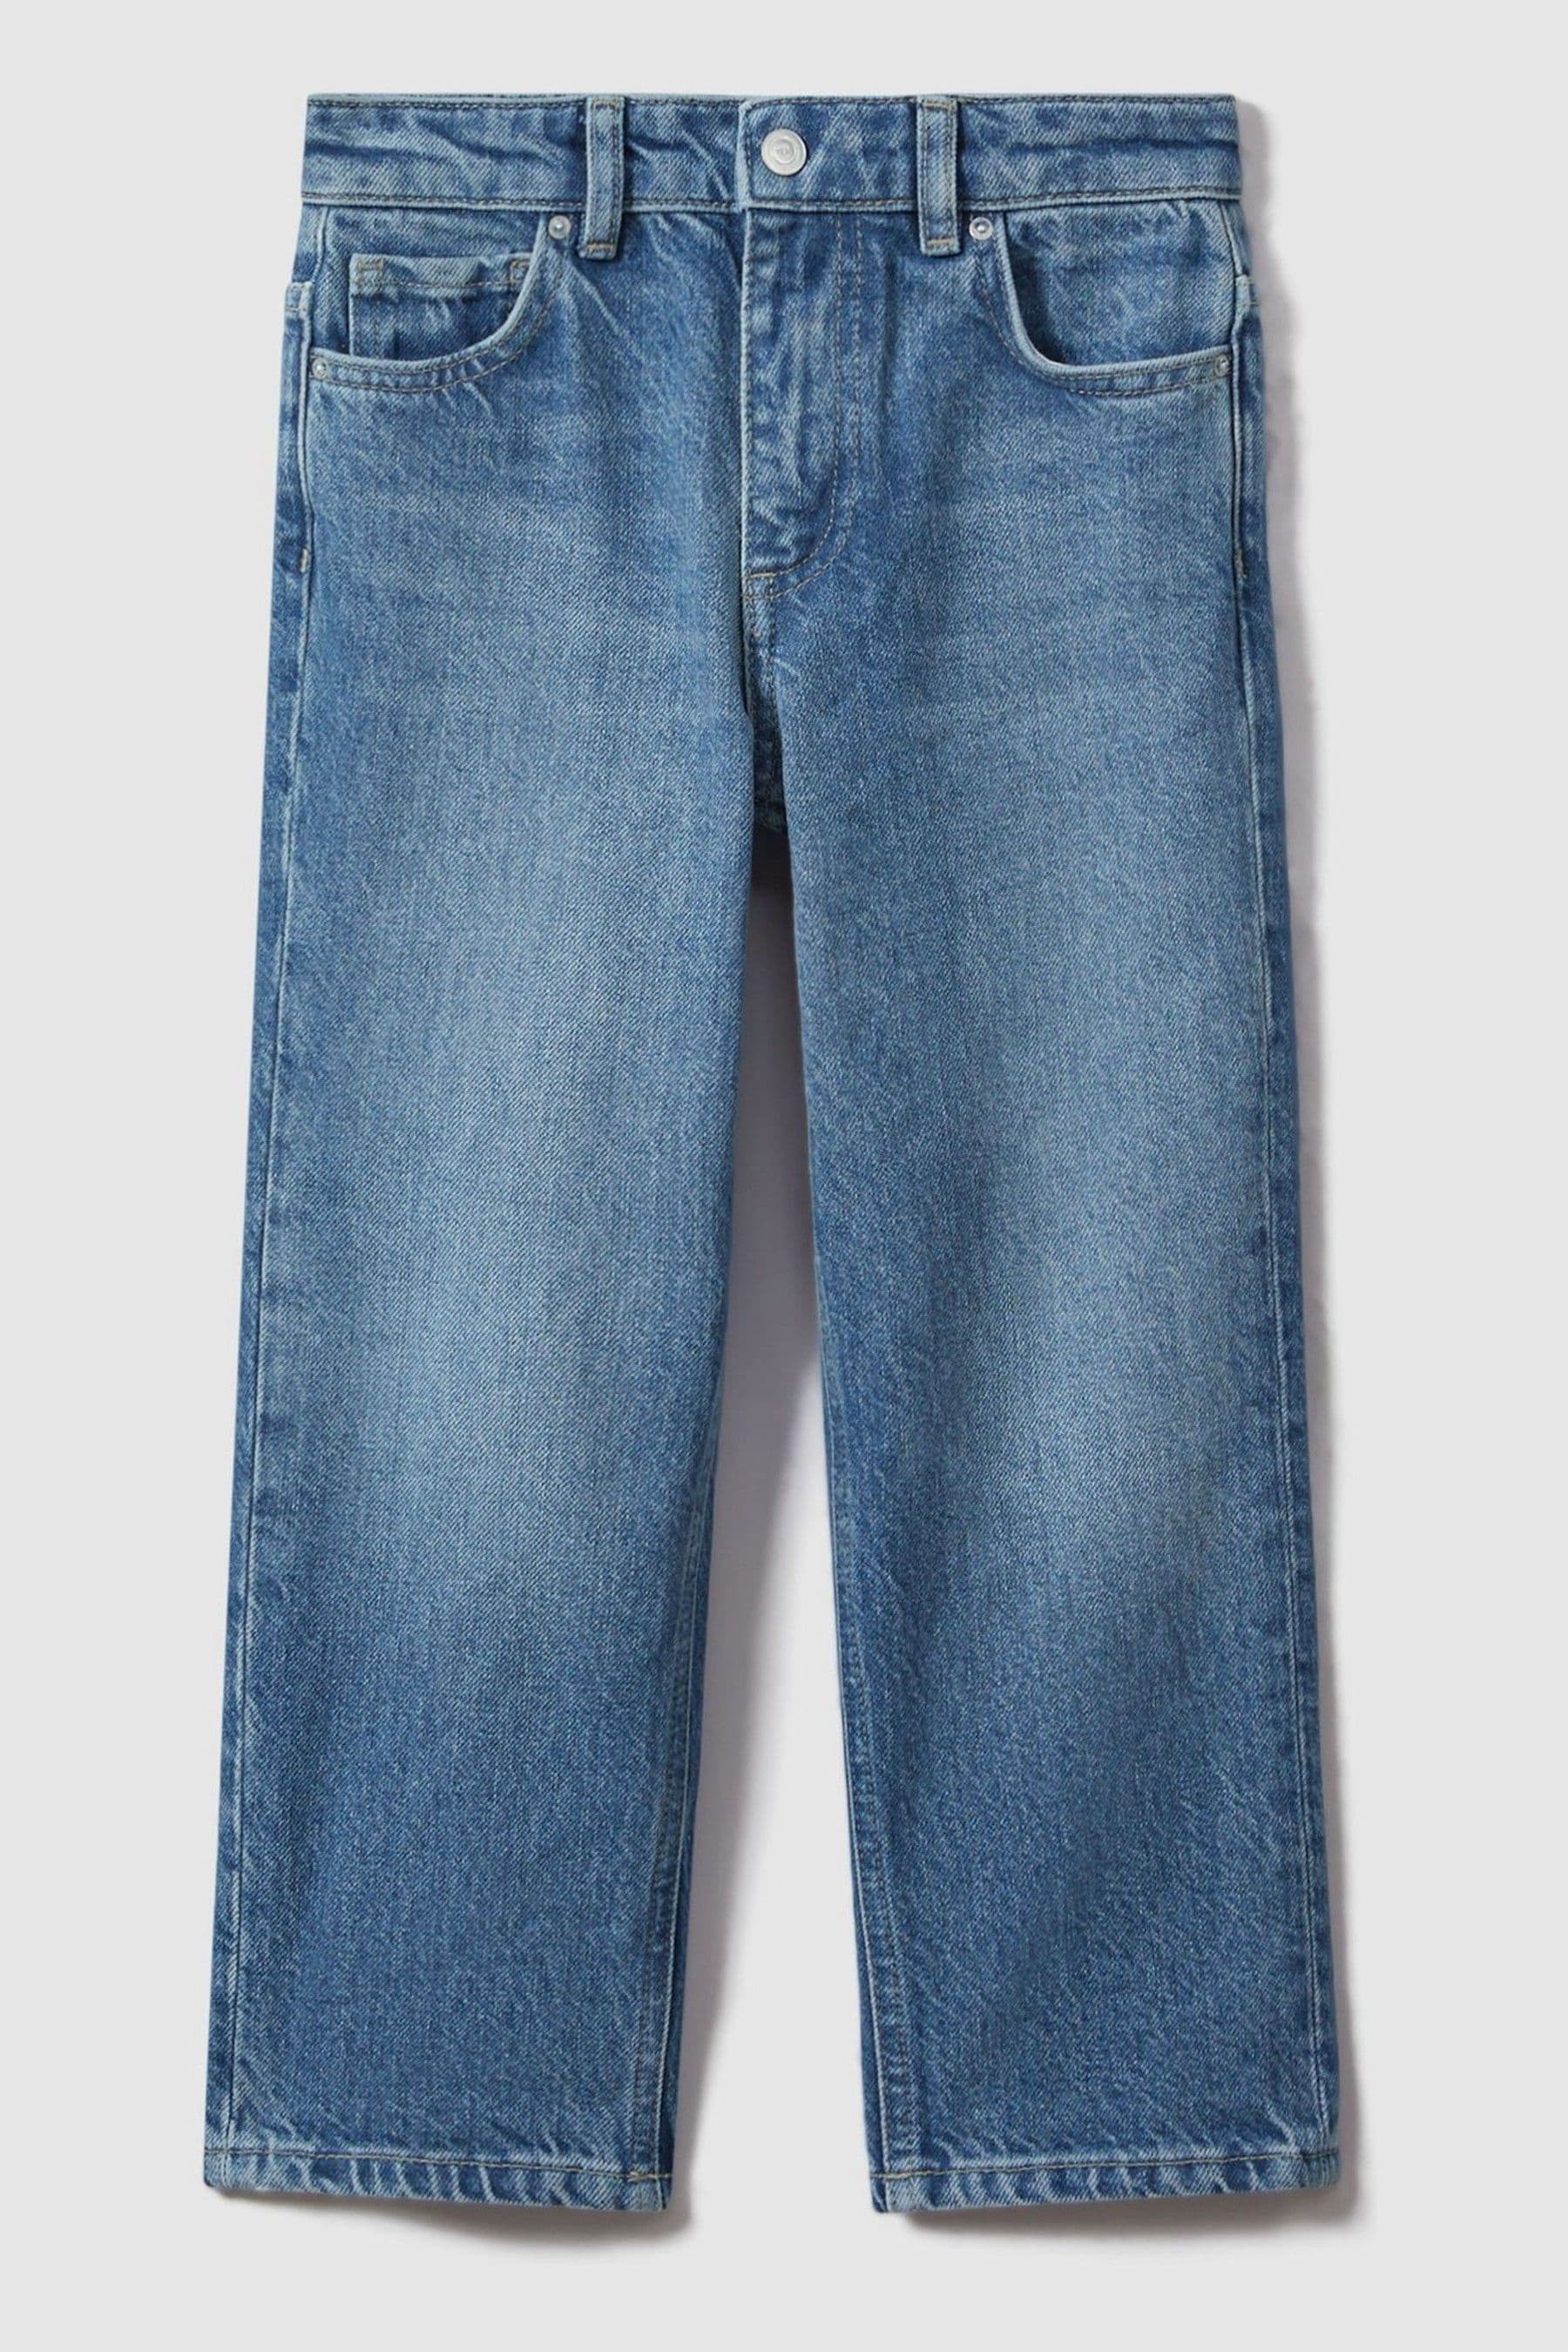 Reiss Kids' Ronnie - Mid Blue Loose Fit Adjuster Jeans, Uk 13-14 Yrs